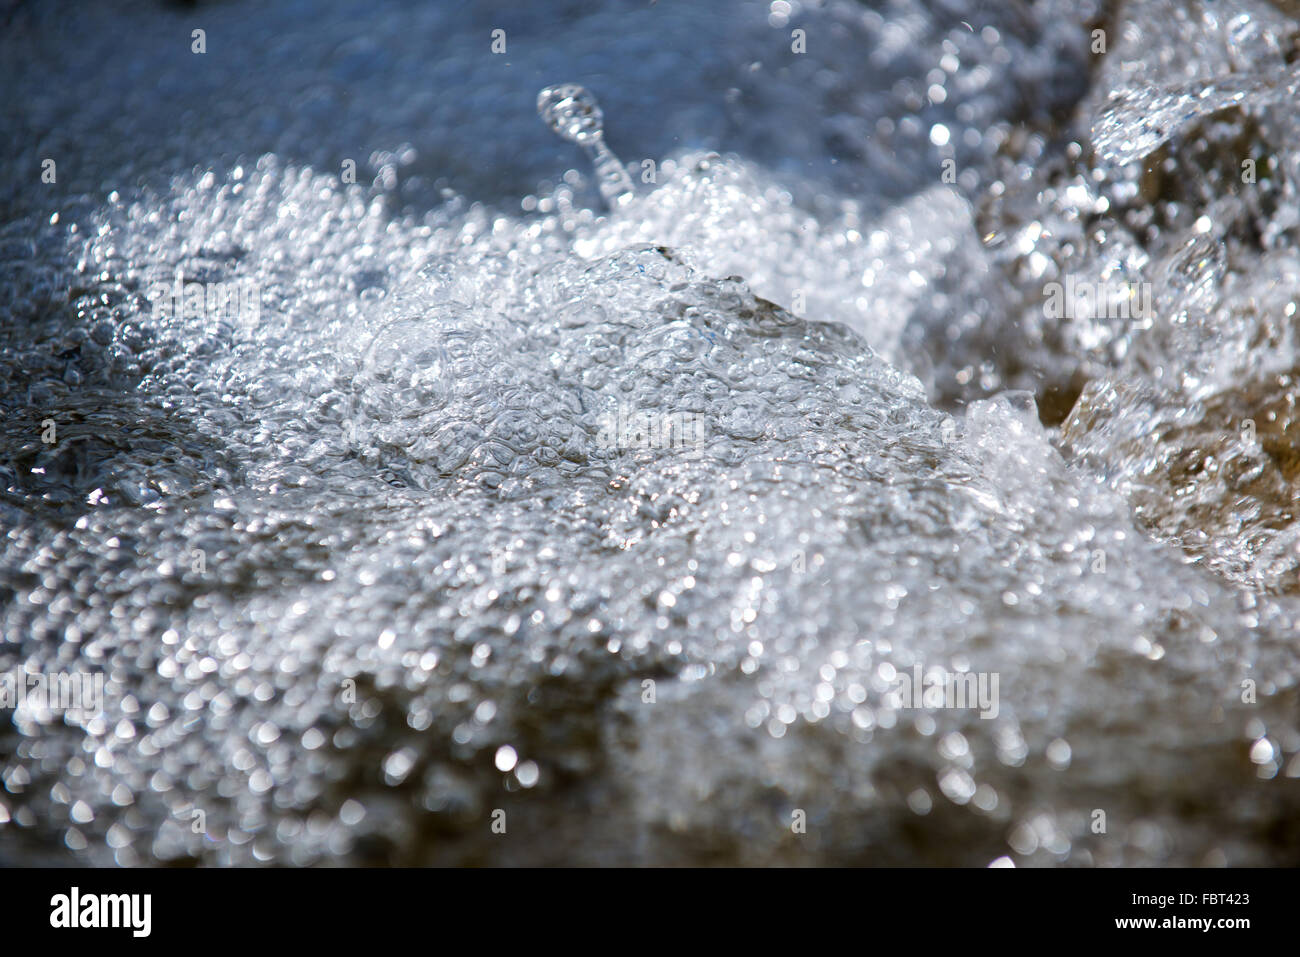 Bubbles on surface of flowing water Stock Photo